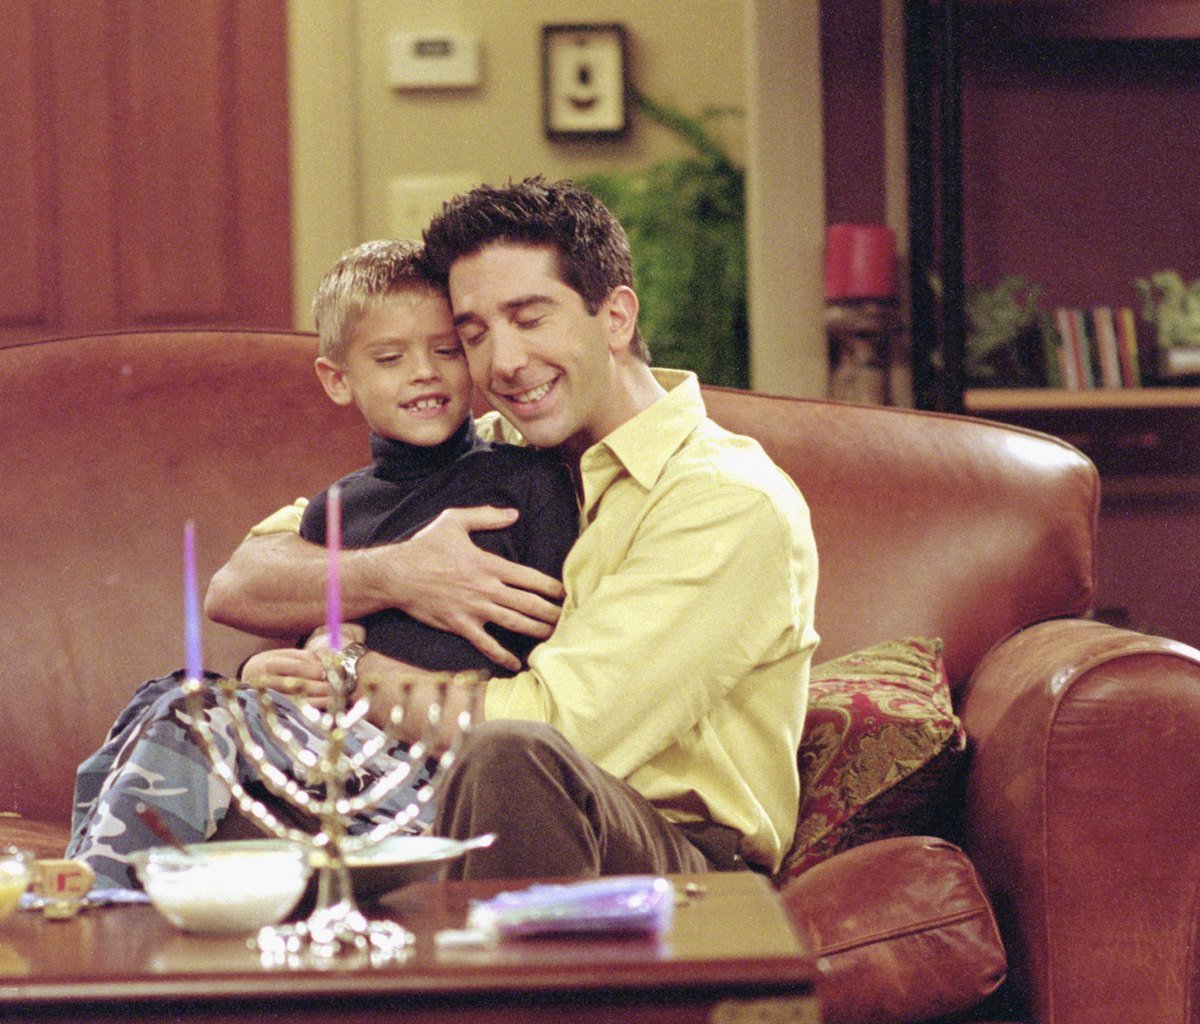 FRIENDS -- "The One with the Holiday Armadillo"